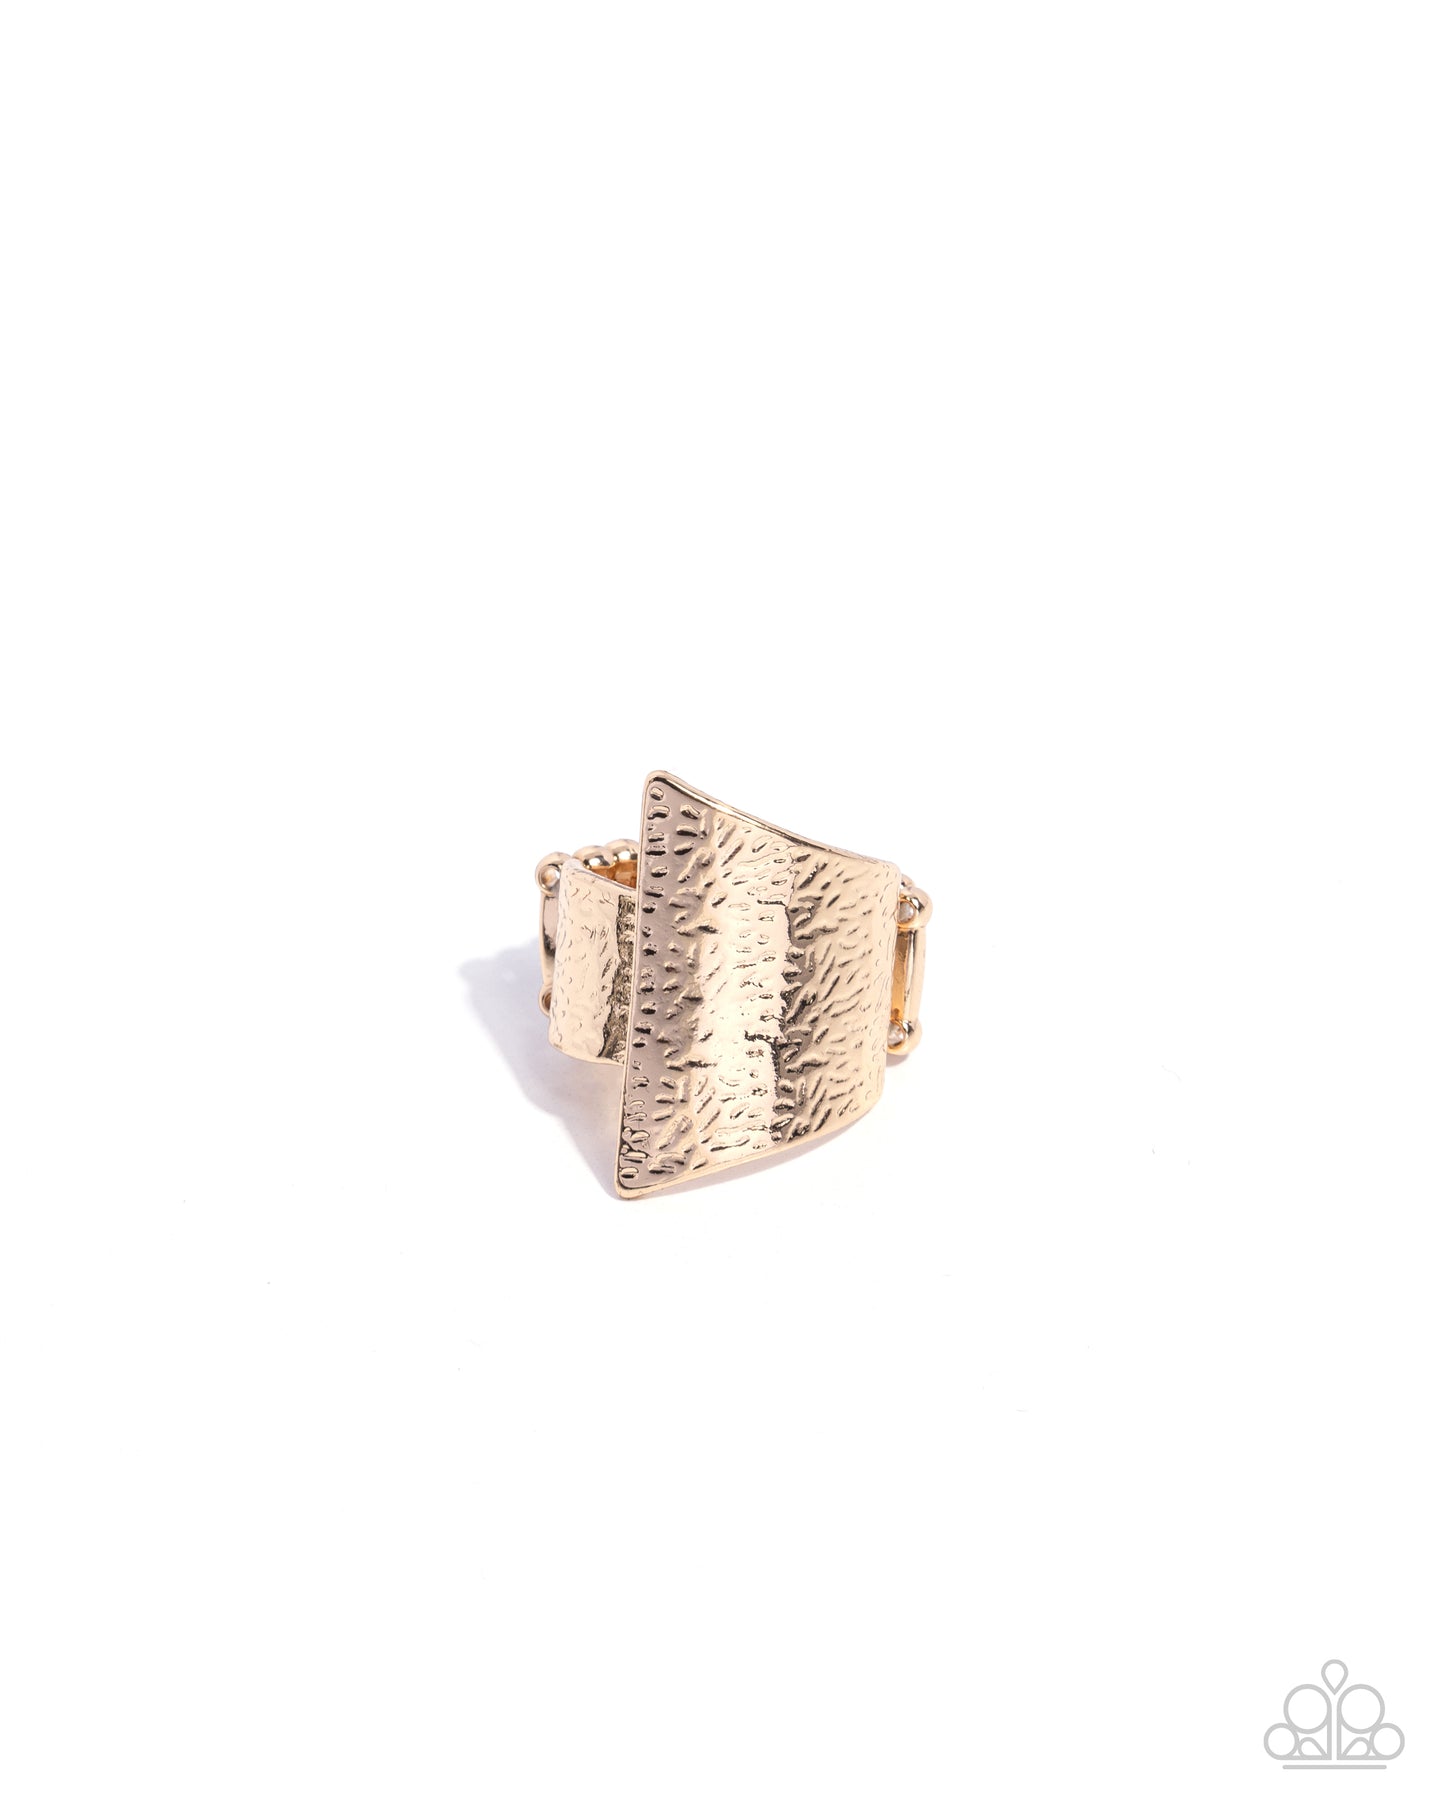 <p>Hammered in rippling details, two mismatched shimmery gold frames asymmetrically overlap across the finger for an edgy look. Features a stretchy band for a flexible fit.</p> <p><i> Sold as one individual ring.</i></p>